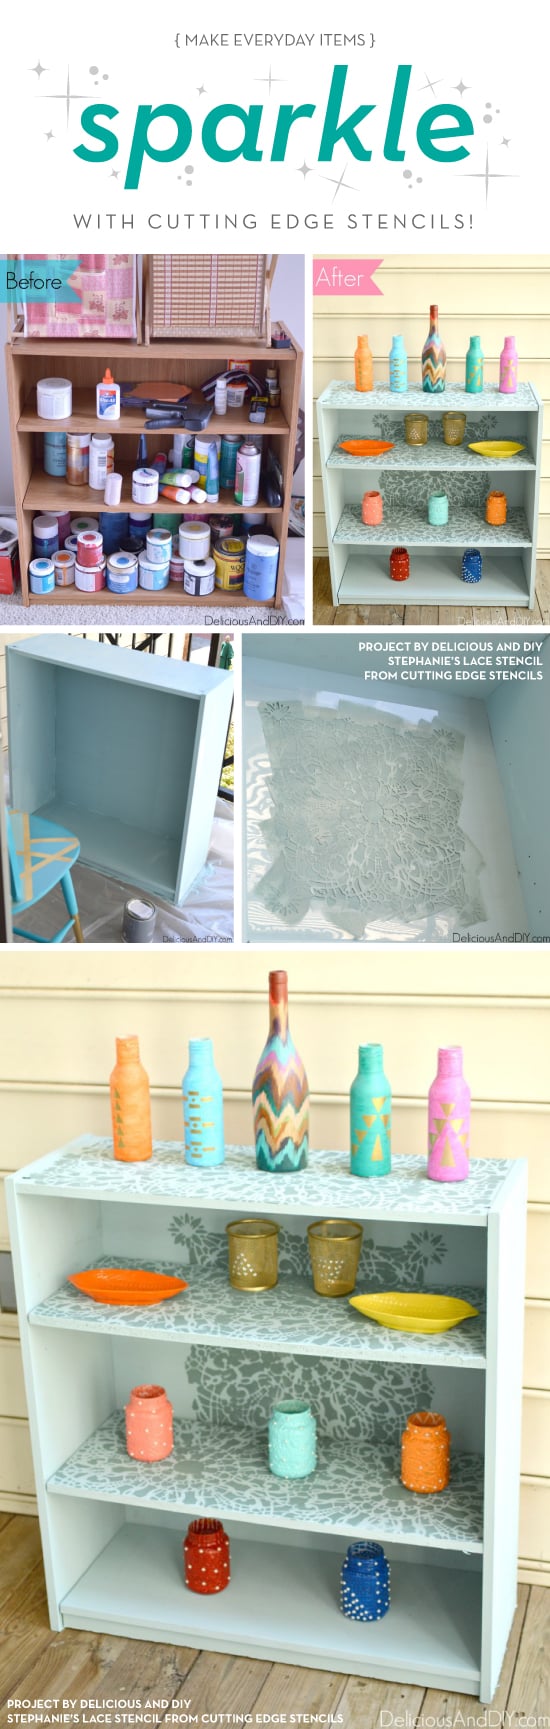 Cutting Edge Stencils shares a DIY stenicled bookcase using the Stephanies Lace Stencil. http://www.cuttingedgestencils.com/lace-stencil-wall-decor-stencils.html